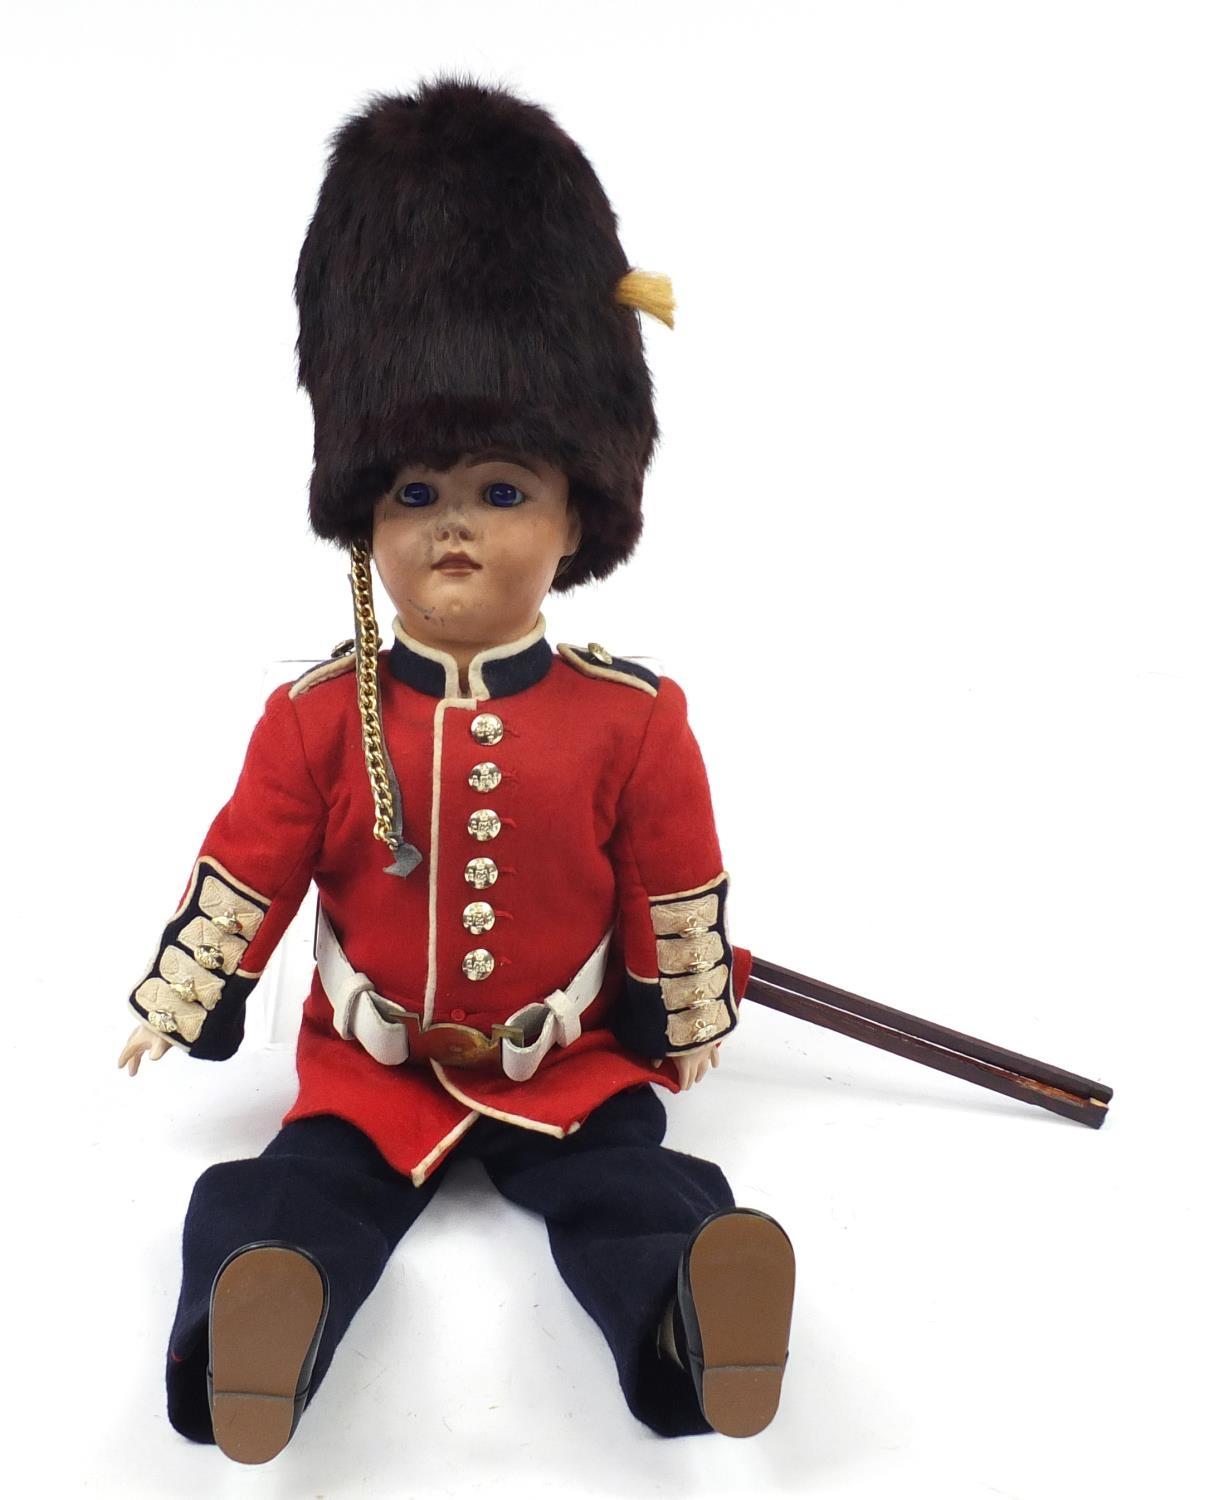 Simon & Halbig bisque headed Beefeater doll, 71cm high